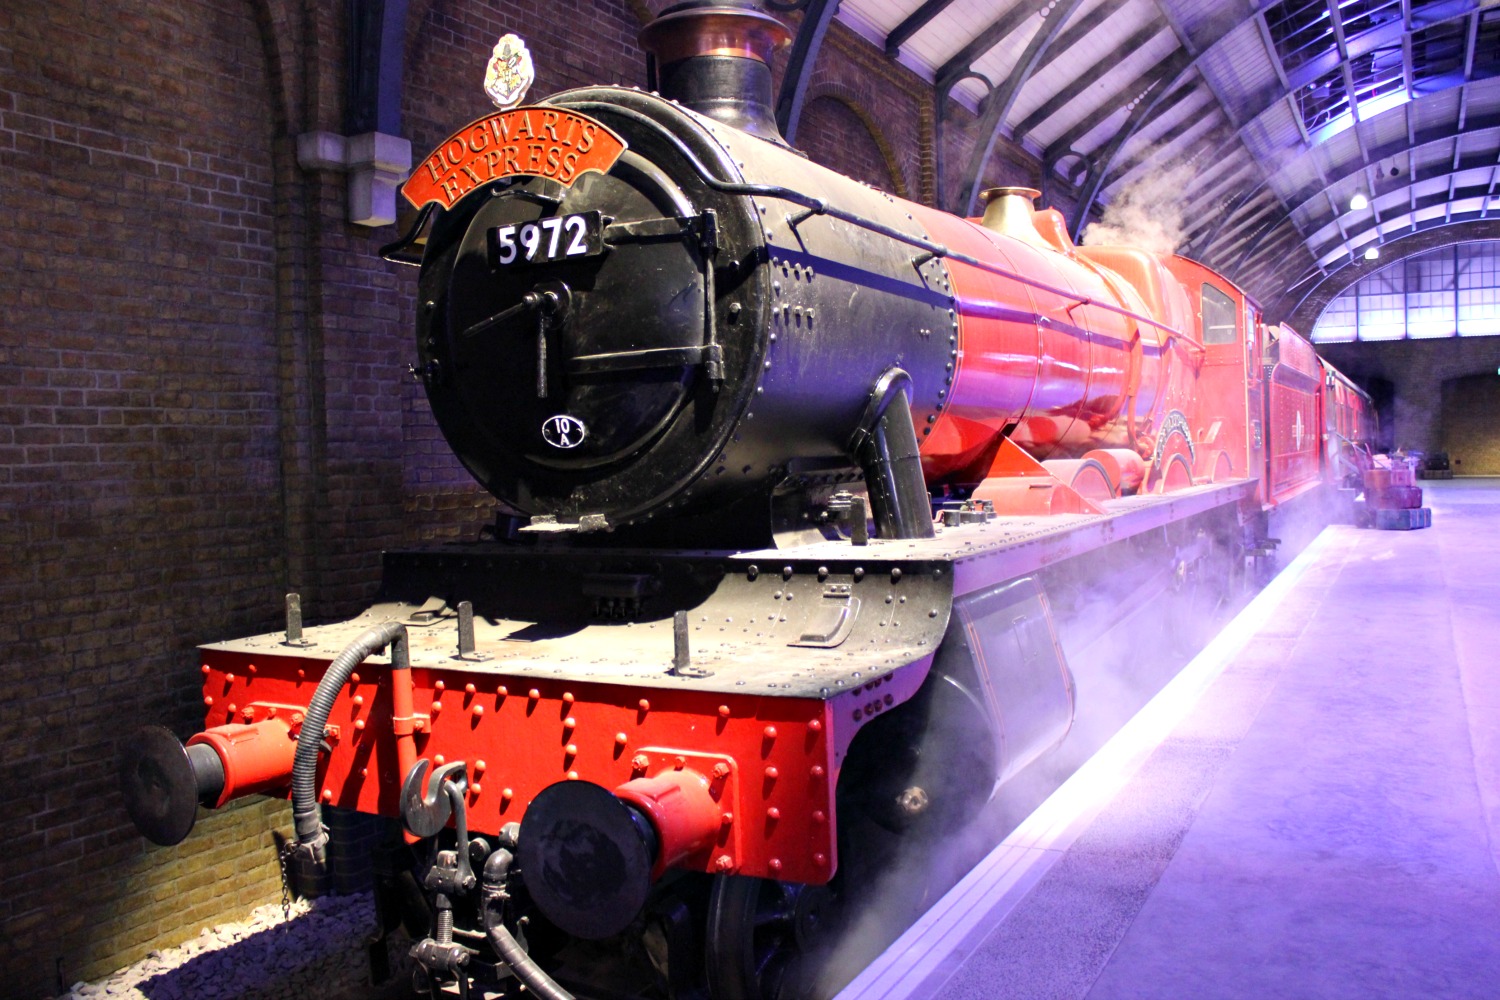 Omgivelser apologi Smitsom The top 33 days out for Harry Potter fans - MUMMYTRAVELS